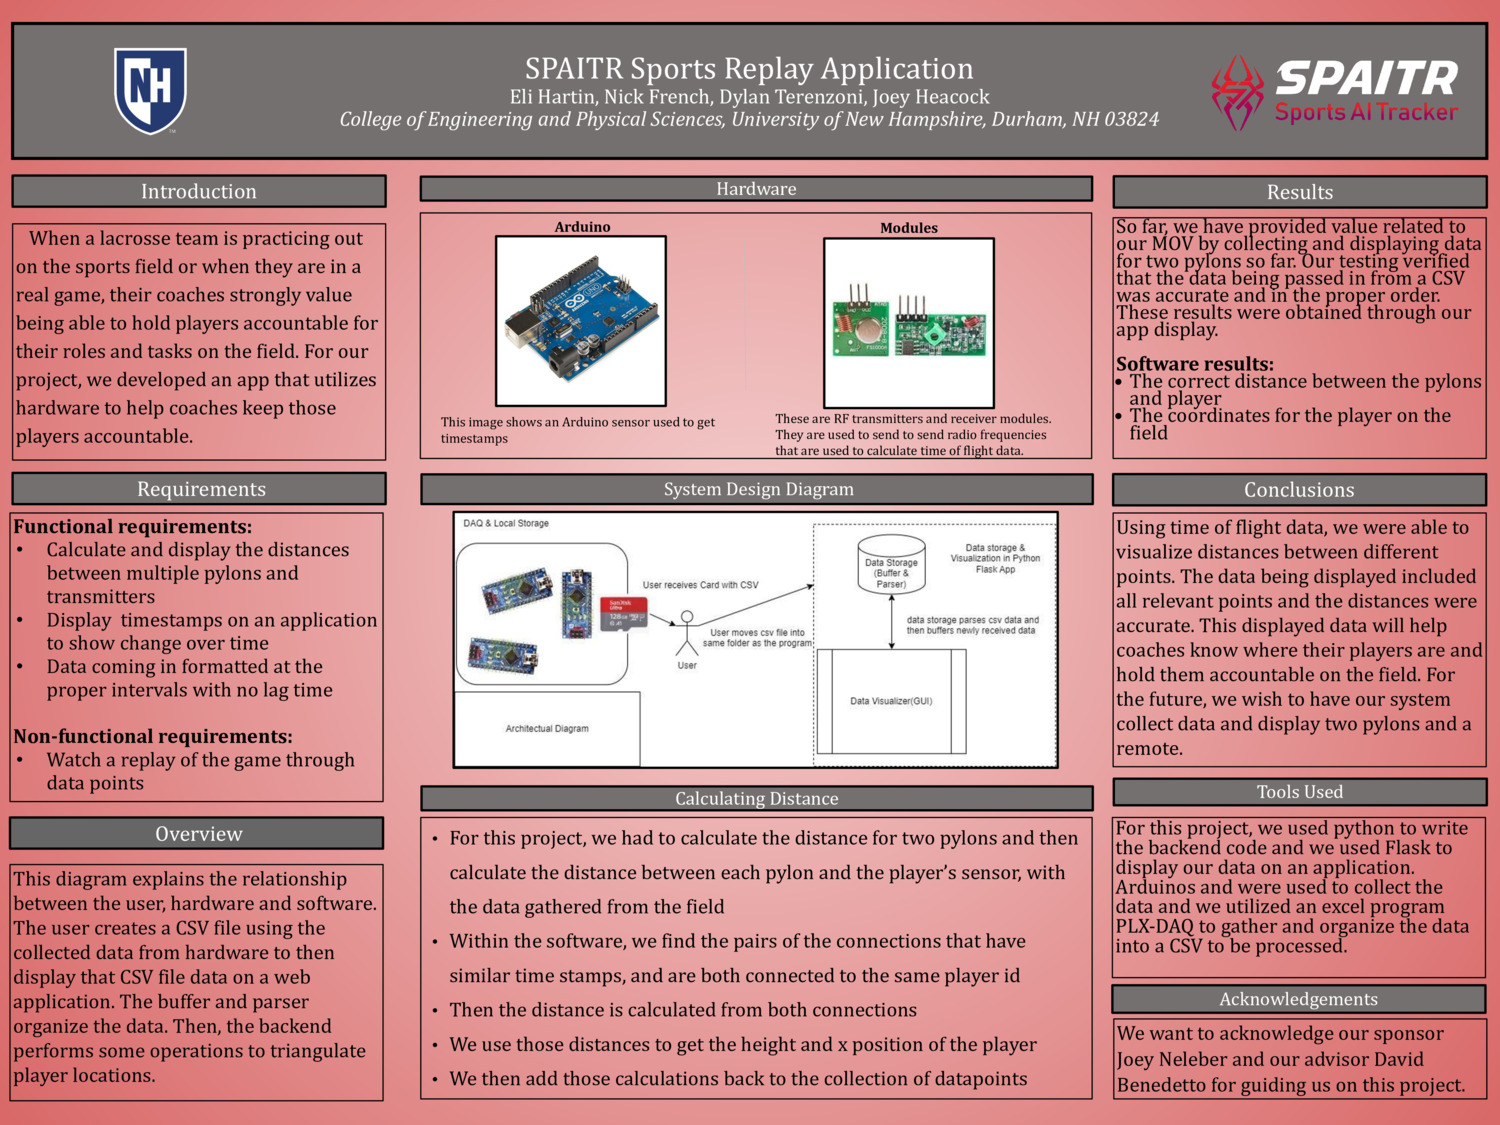 Spaitr Sports Replay Application by ncf1007